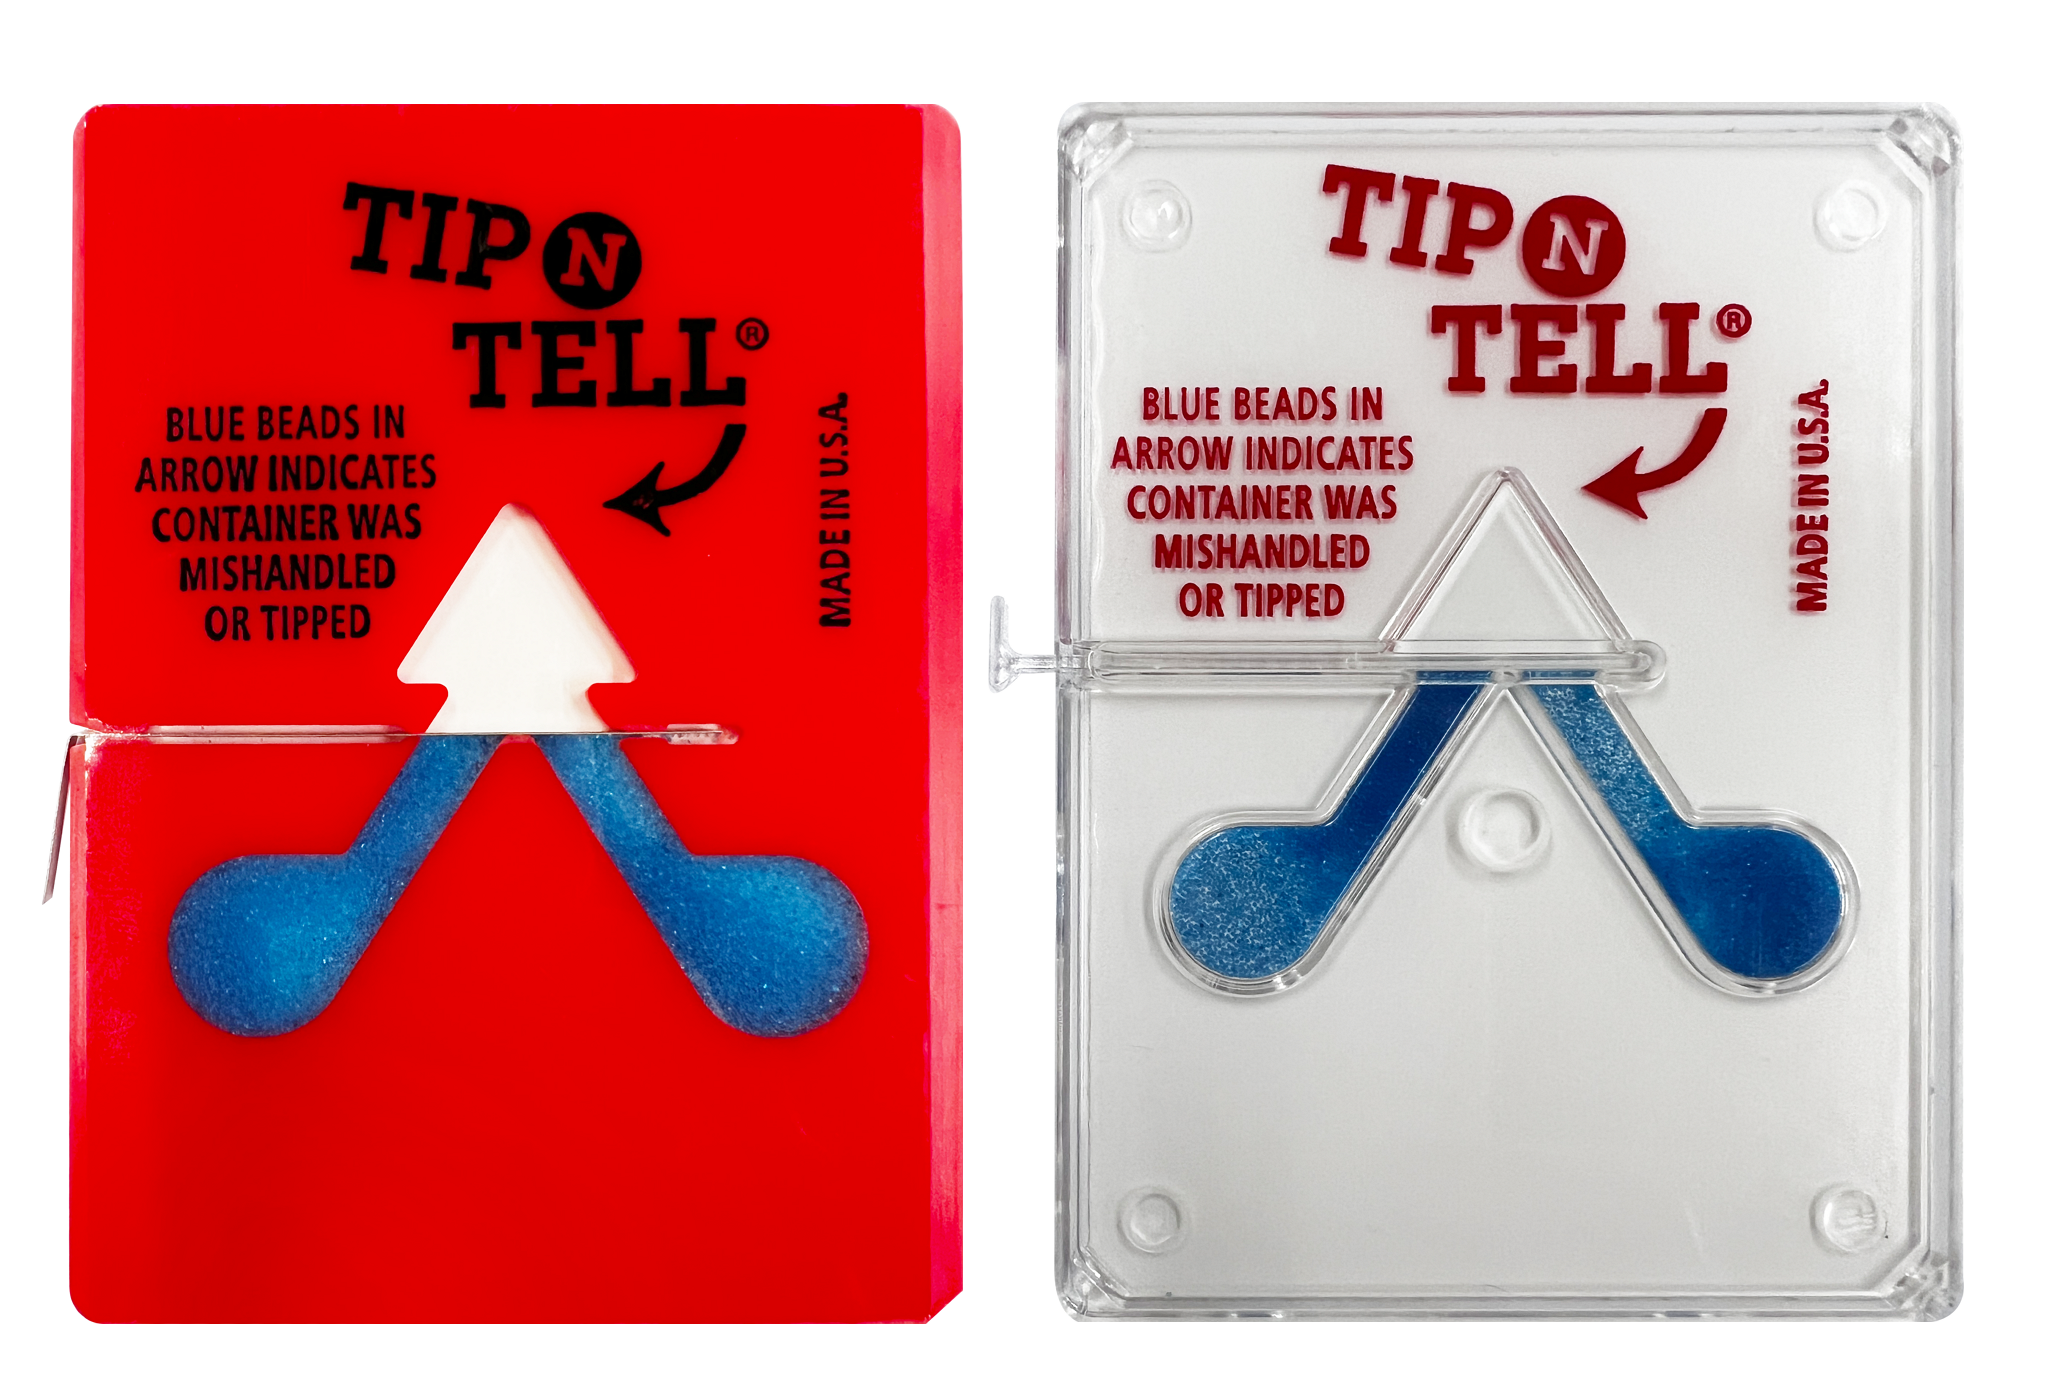 tip n tell indicator labels